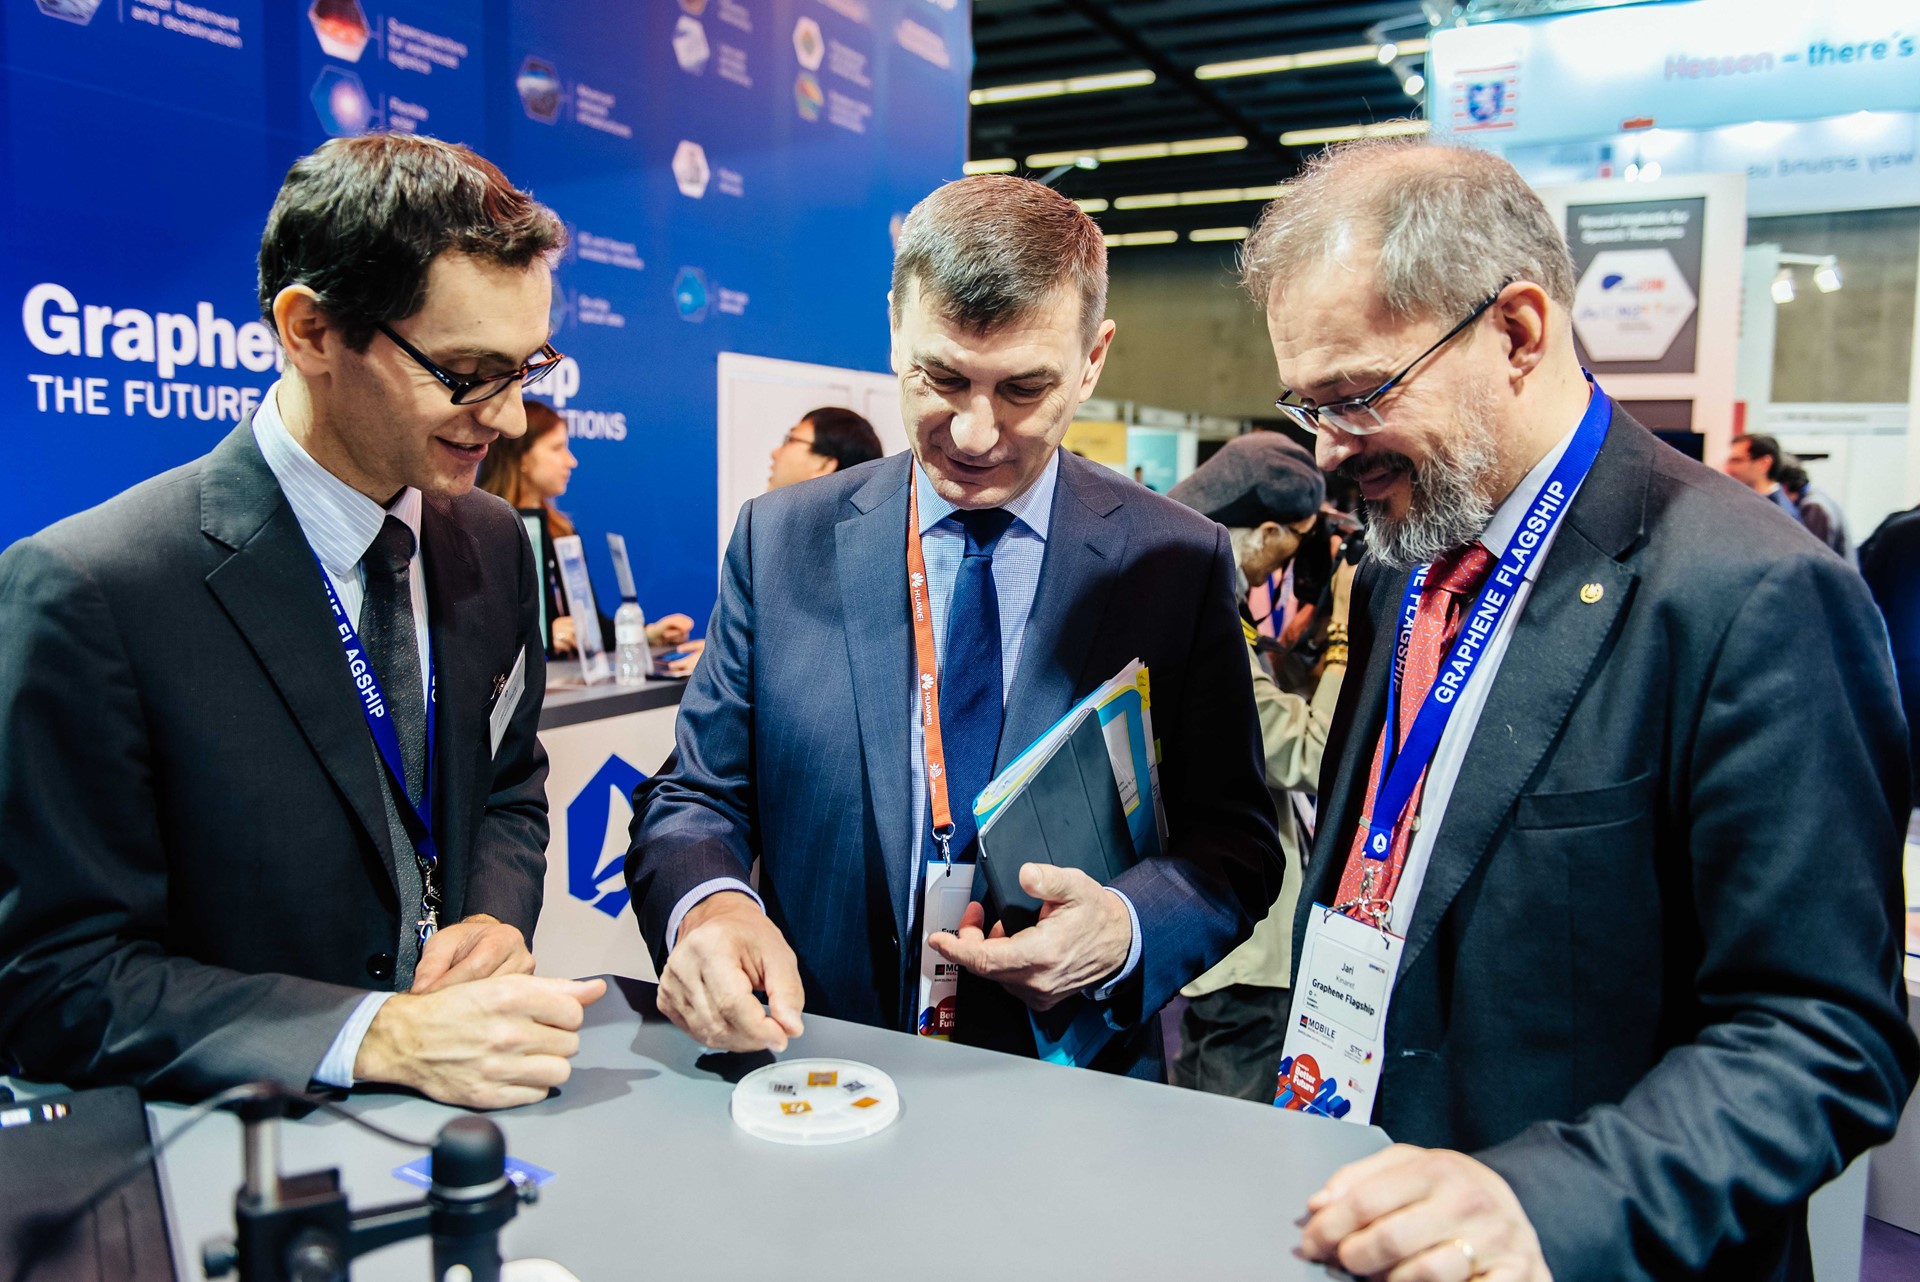 EU Commission Vice President Andrus Ansip visits the Graphene Pavilion at Mobile World Congress 2018